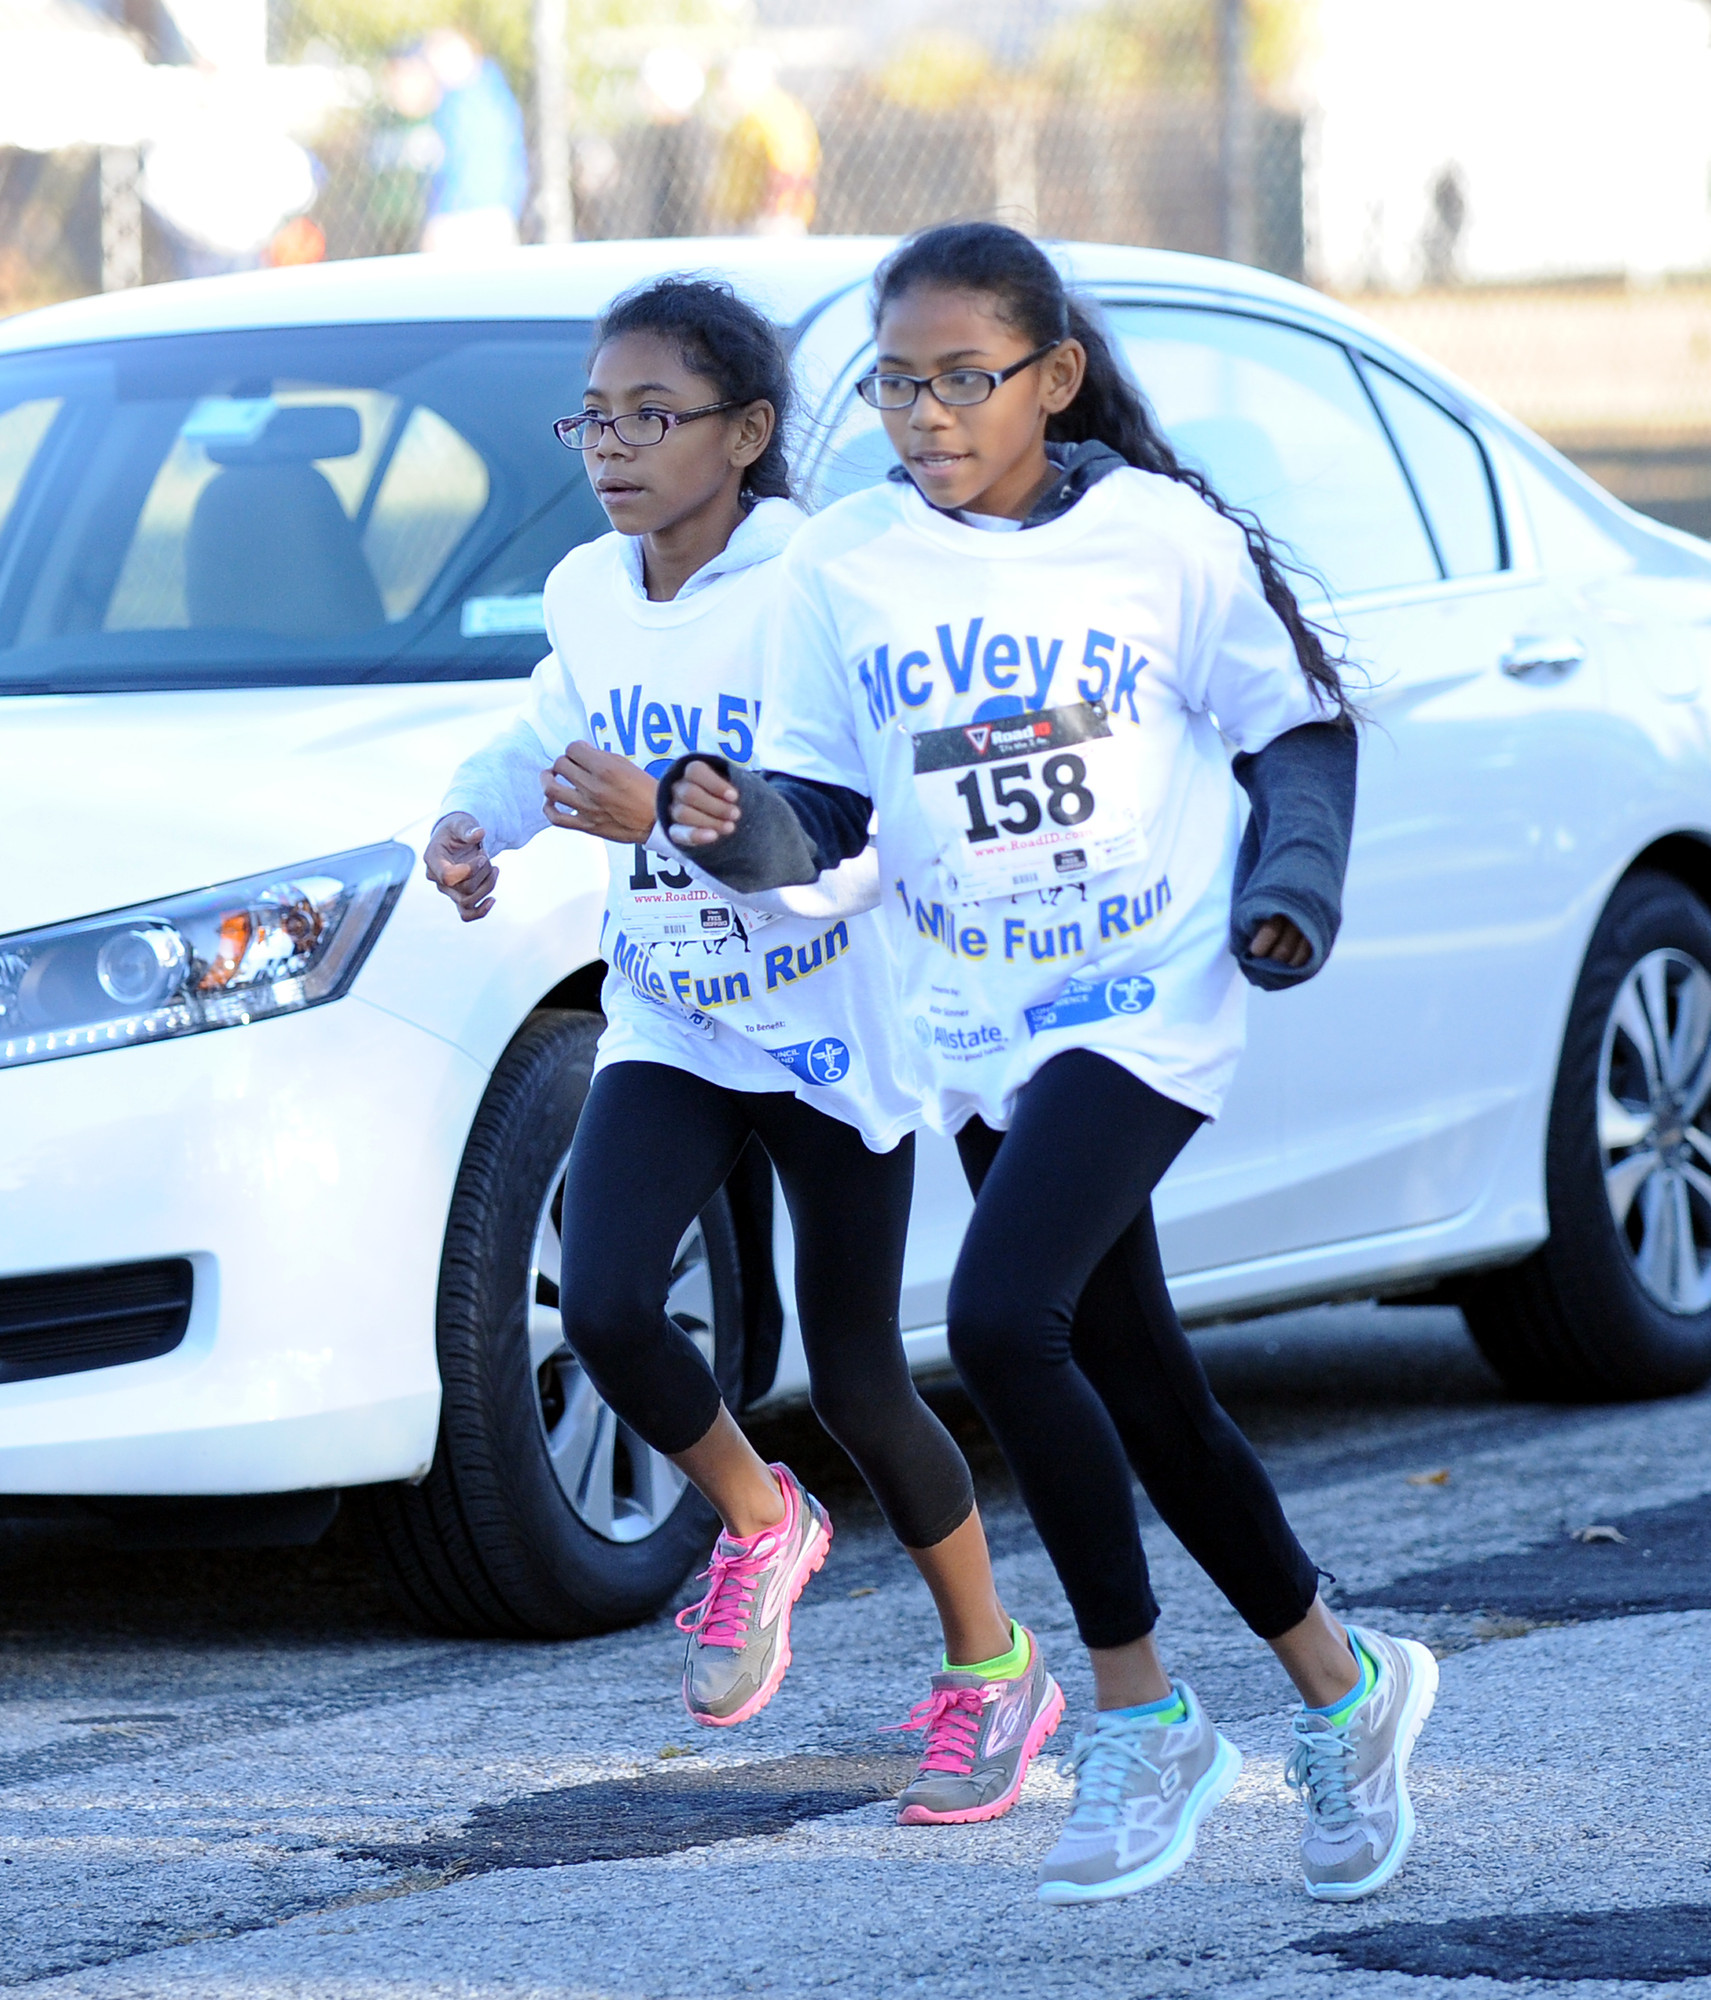 12-year-old twin sisters Isabel and Katherine Marsh ran the entire 5K race side by side.